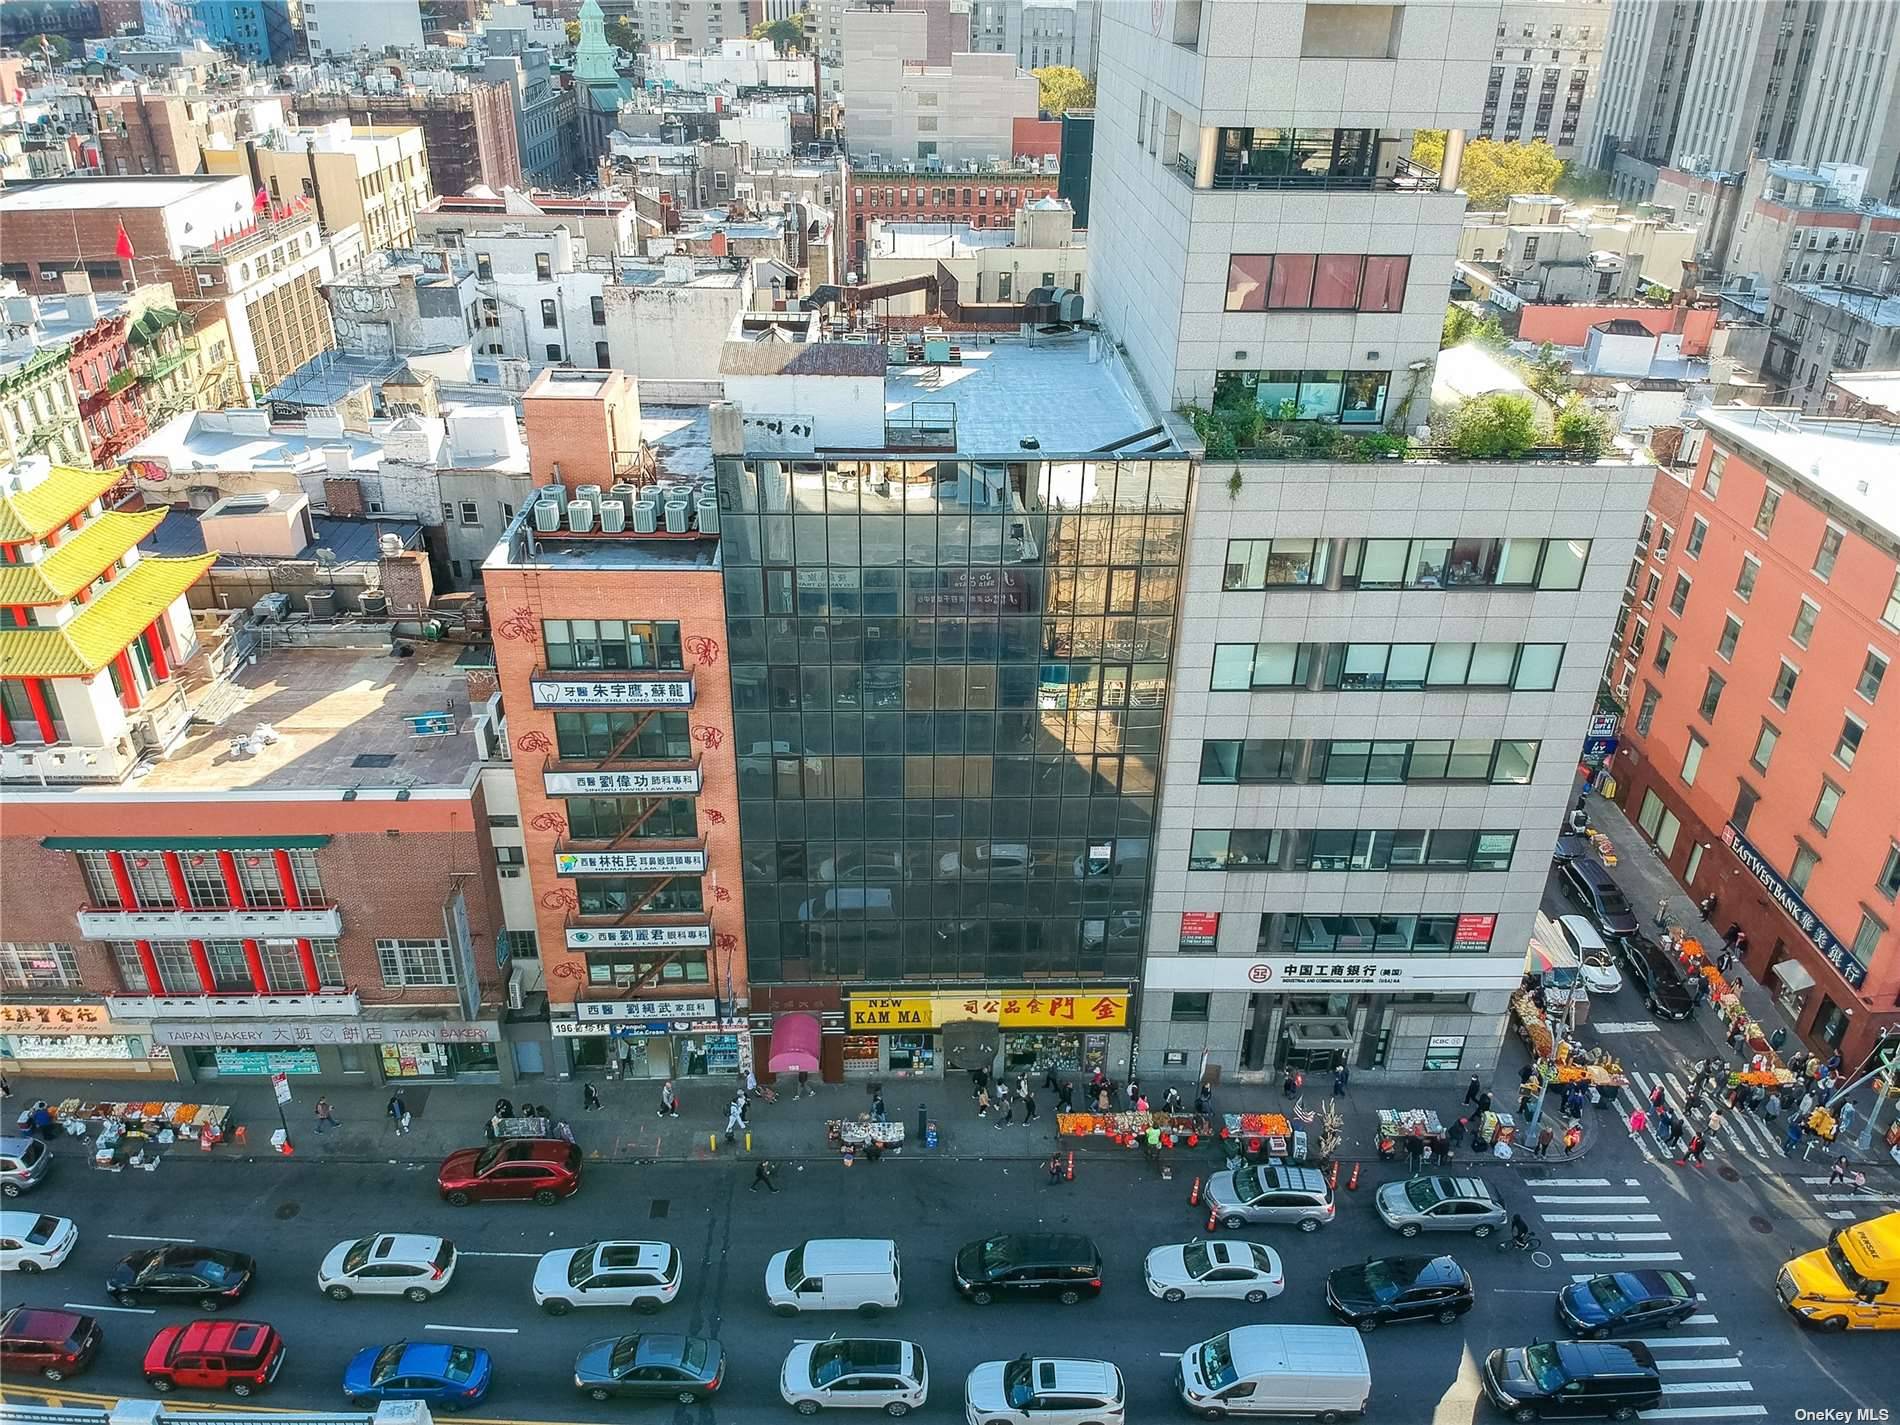 This 1847 gross sq ft commercial condo is perfectly located in the bustling heart of Chinatown, between Mott and Mulberry Streets on Canal Street's south side.